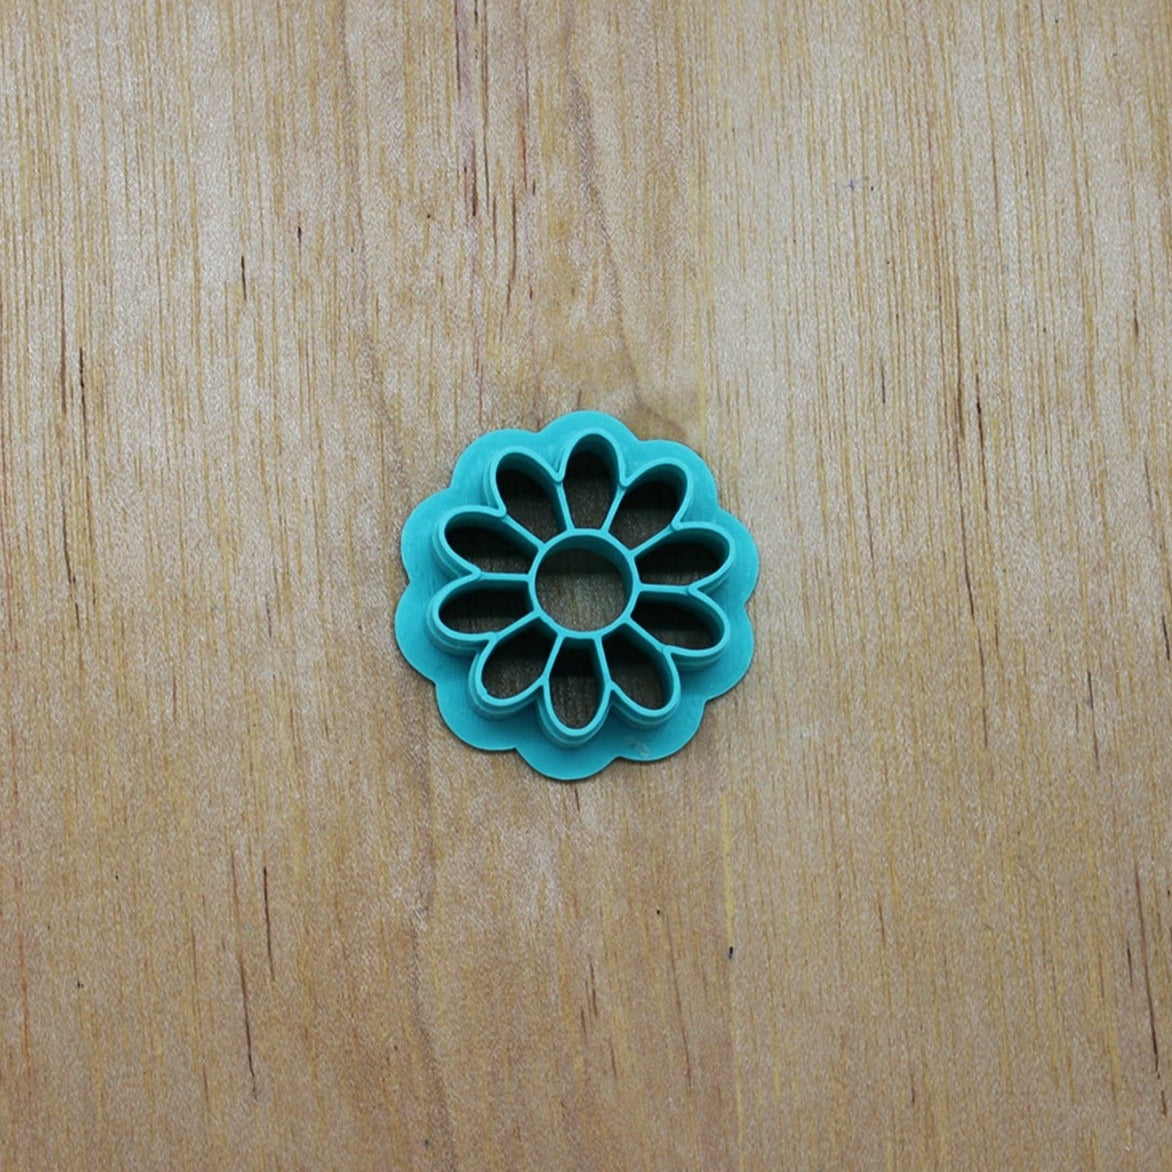 Daisy Flower Cookie Cutter: Versatile Tool for Ceramics, Pottery, Cookies, Polymer Clay & More